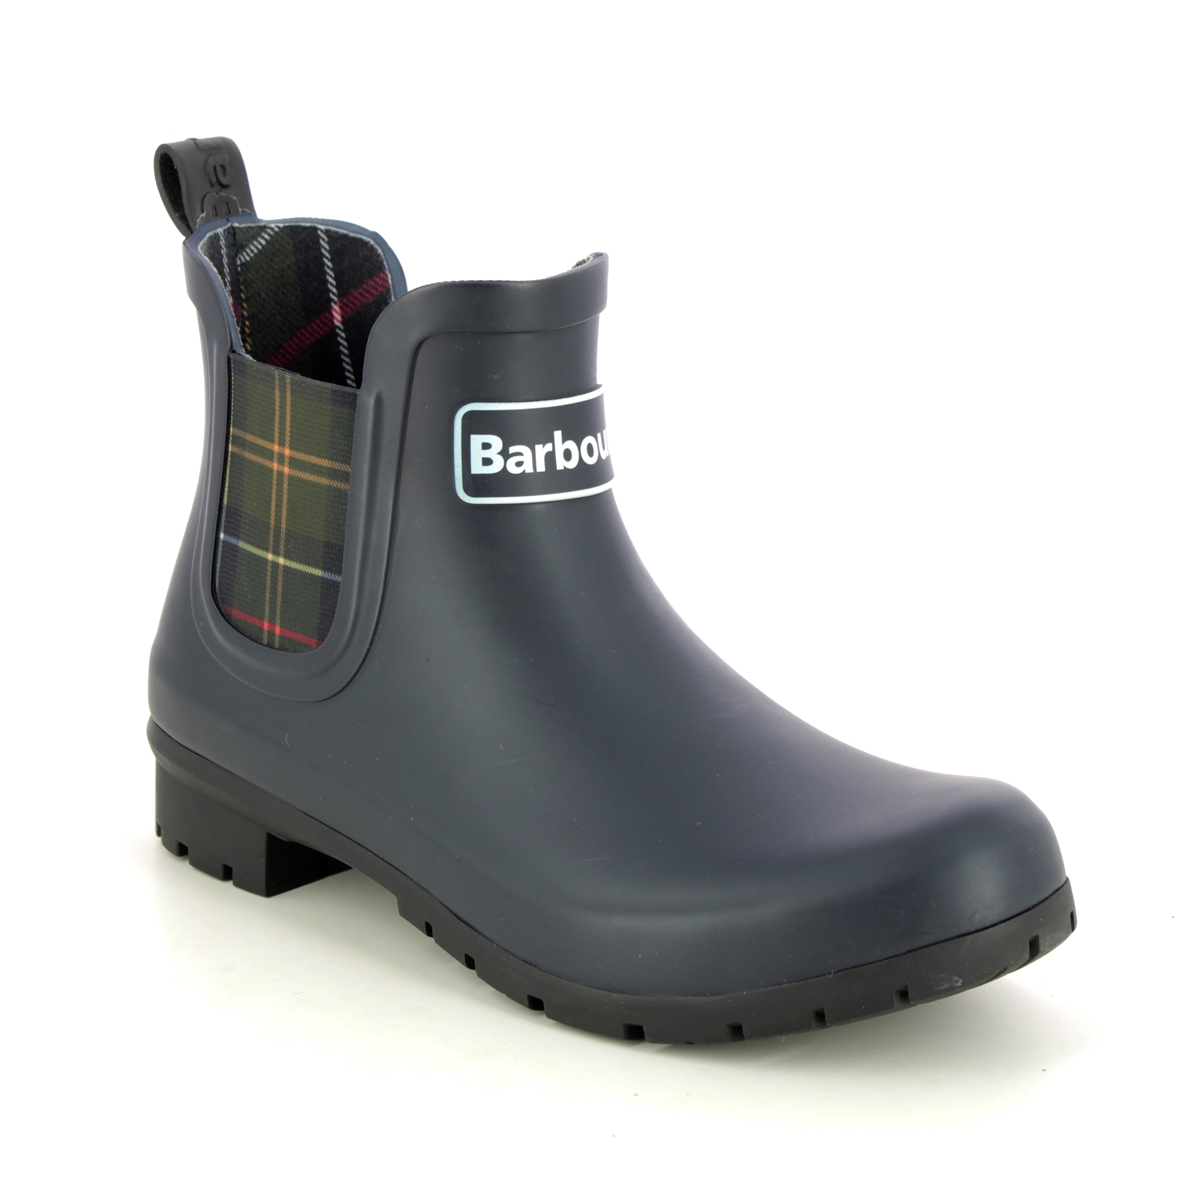 Barbour Kingham Wellie Navy Boots Lrf0088-Ny11 In Size 8 In Plain Navy